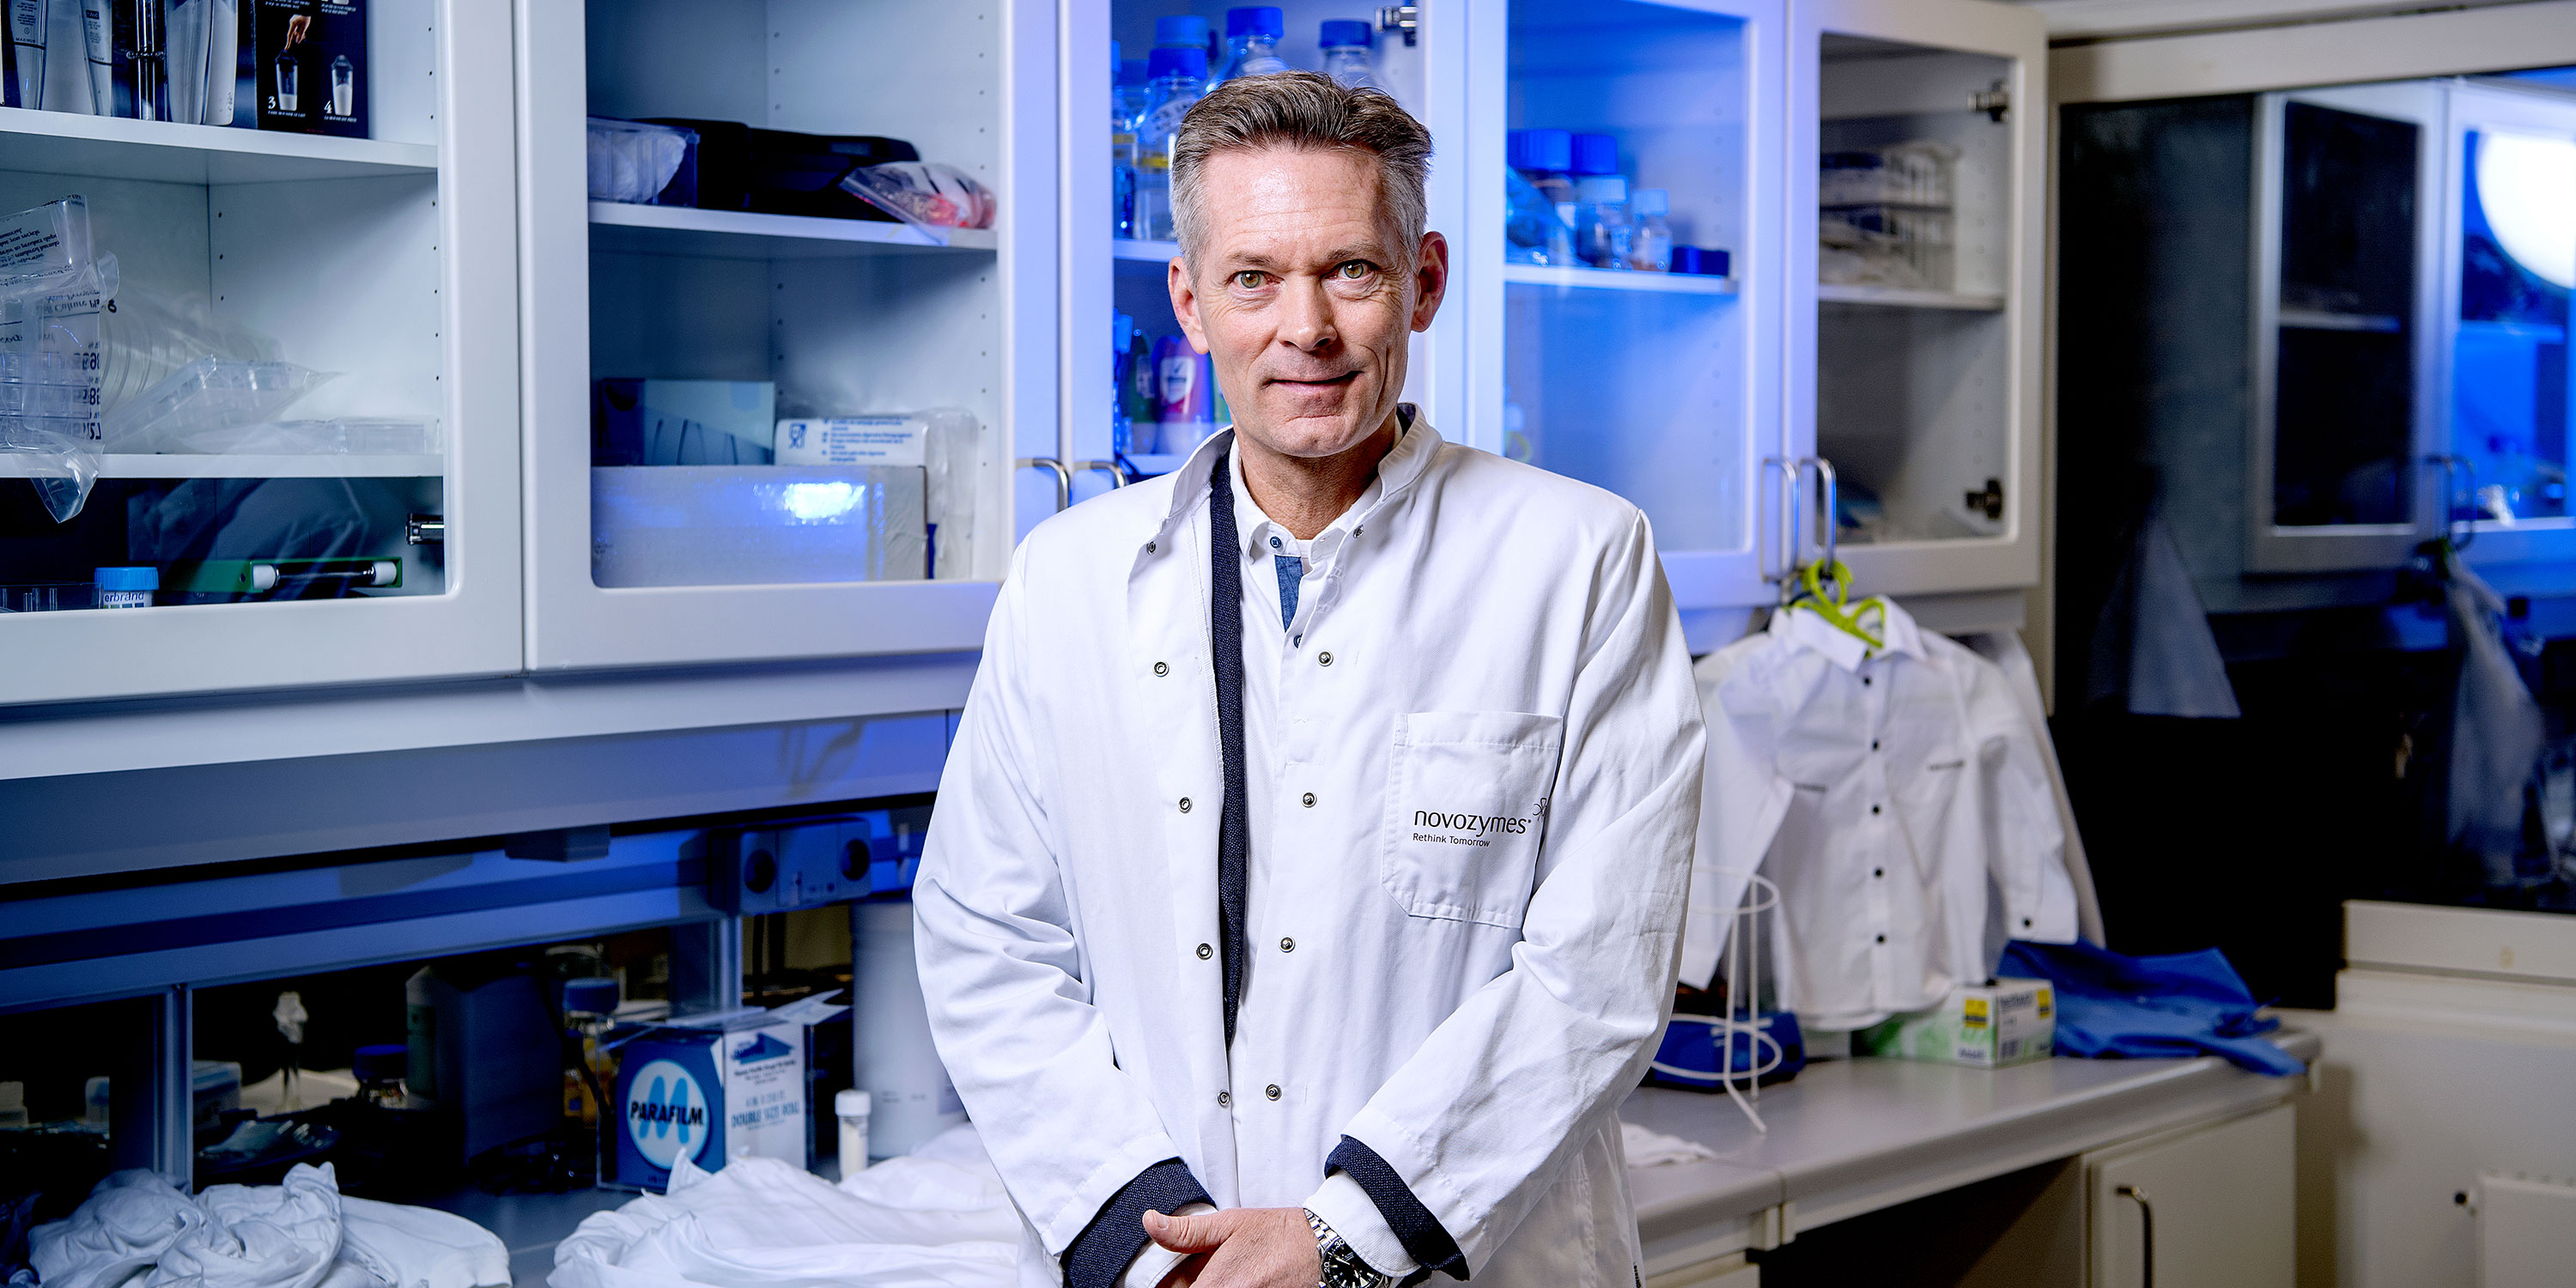 According to Ole Kirk, Vice President, Household Care Application Research, Novozymes is dependent on the universities’ basic research, as this is a field which private companies rarely master. Photo: Bax Lindhardt